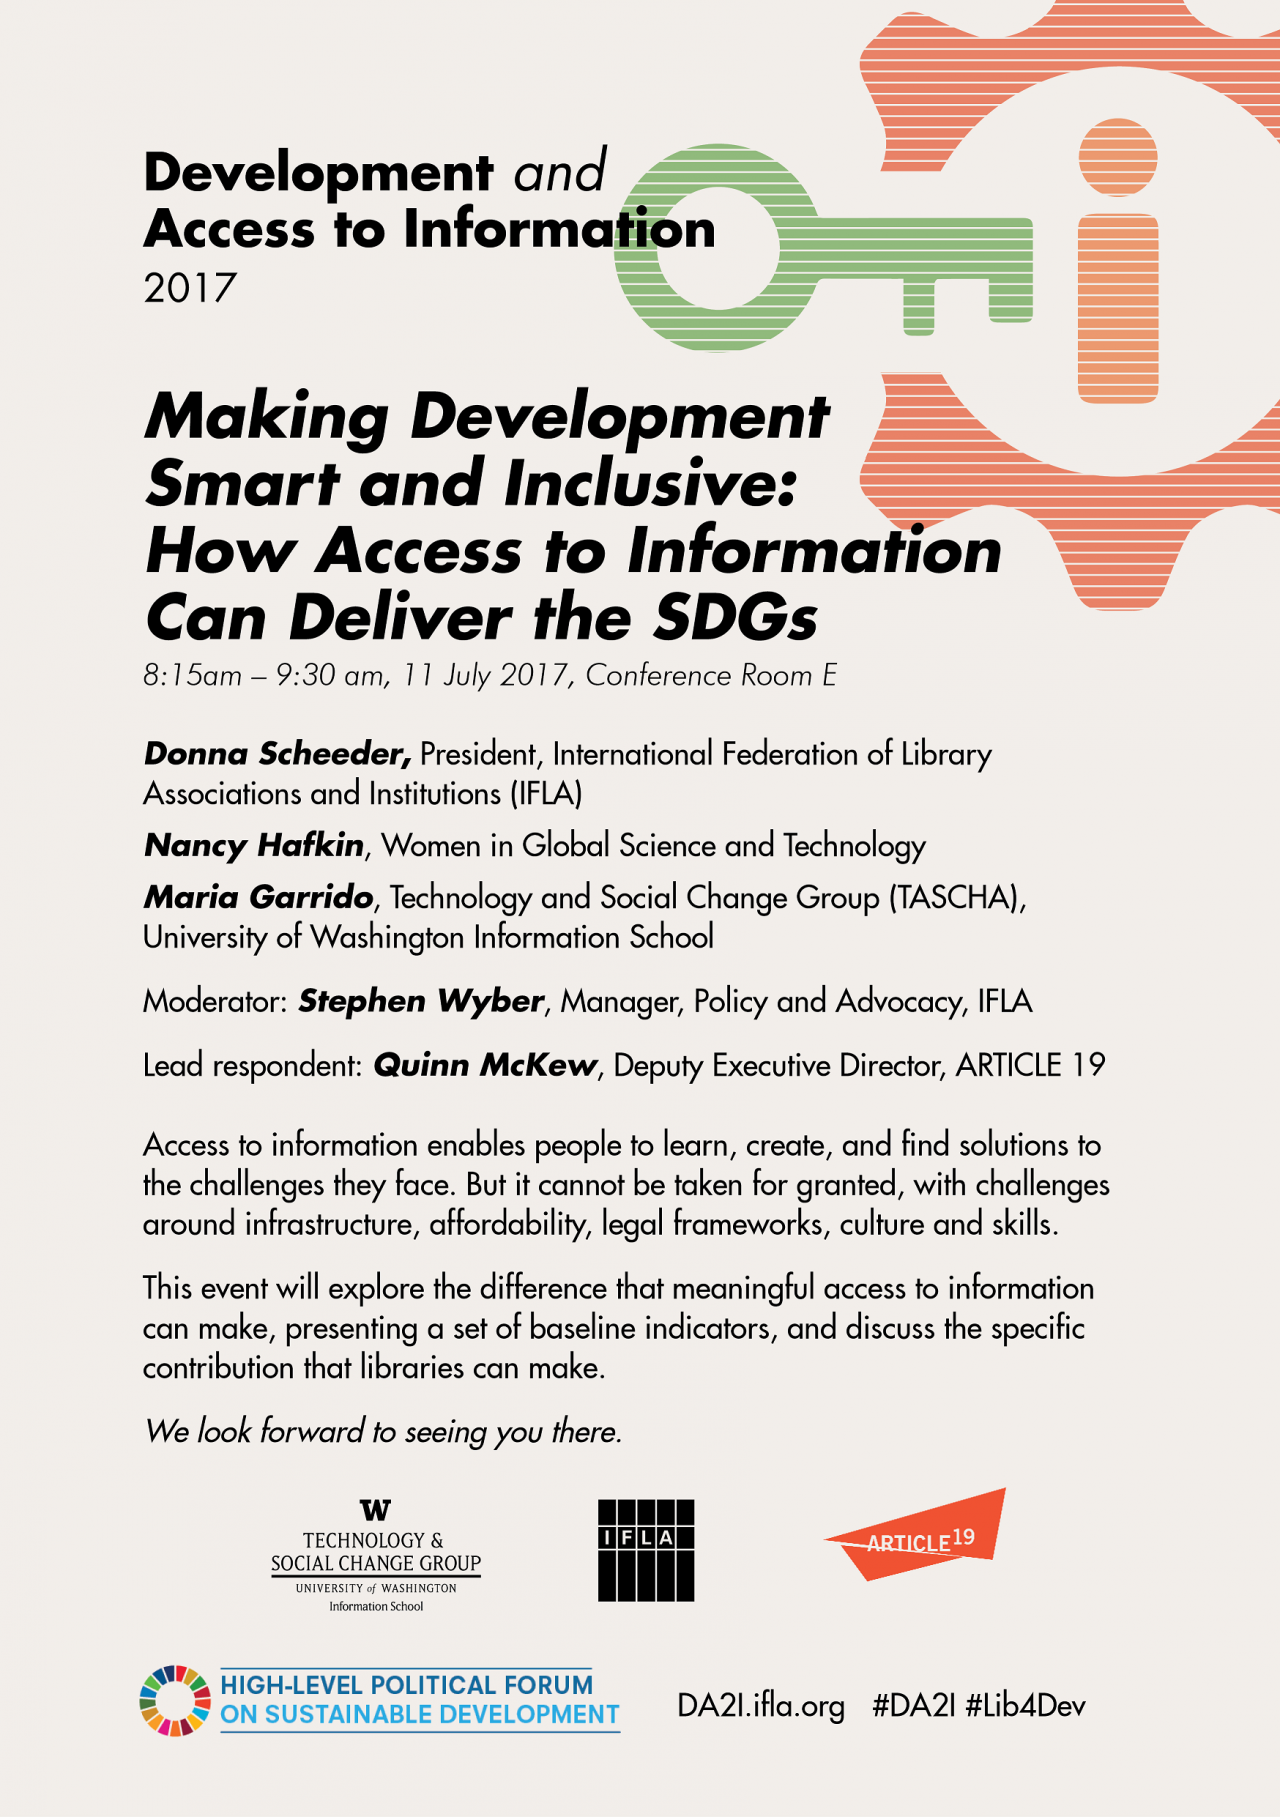 Making development smart and inclusive: How access to information can deliver the SDGs